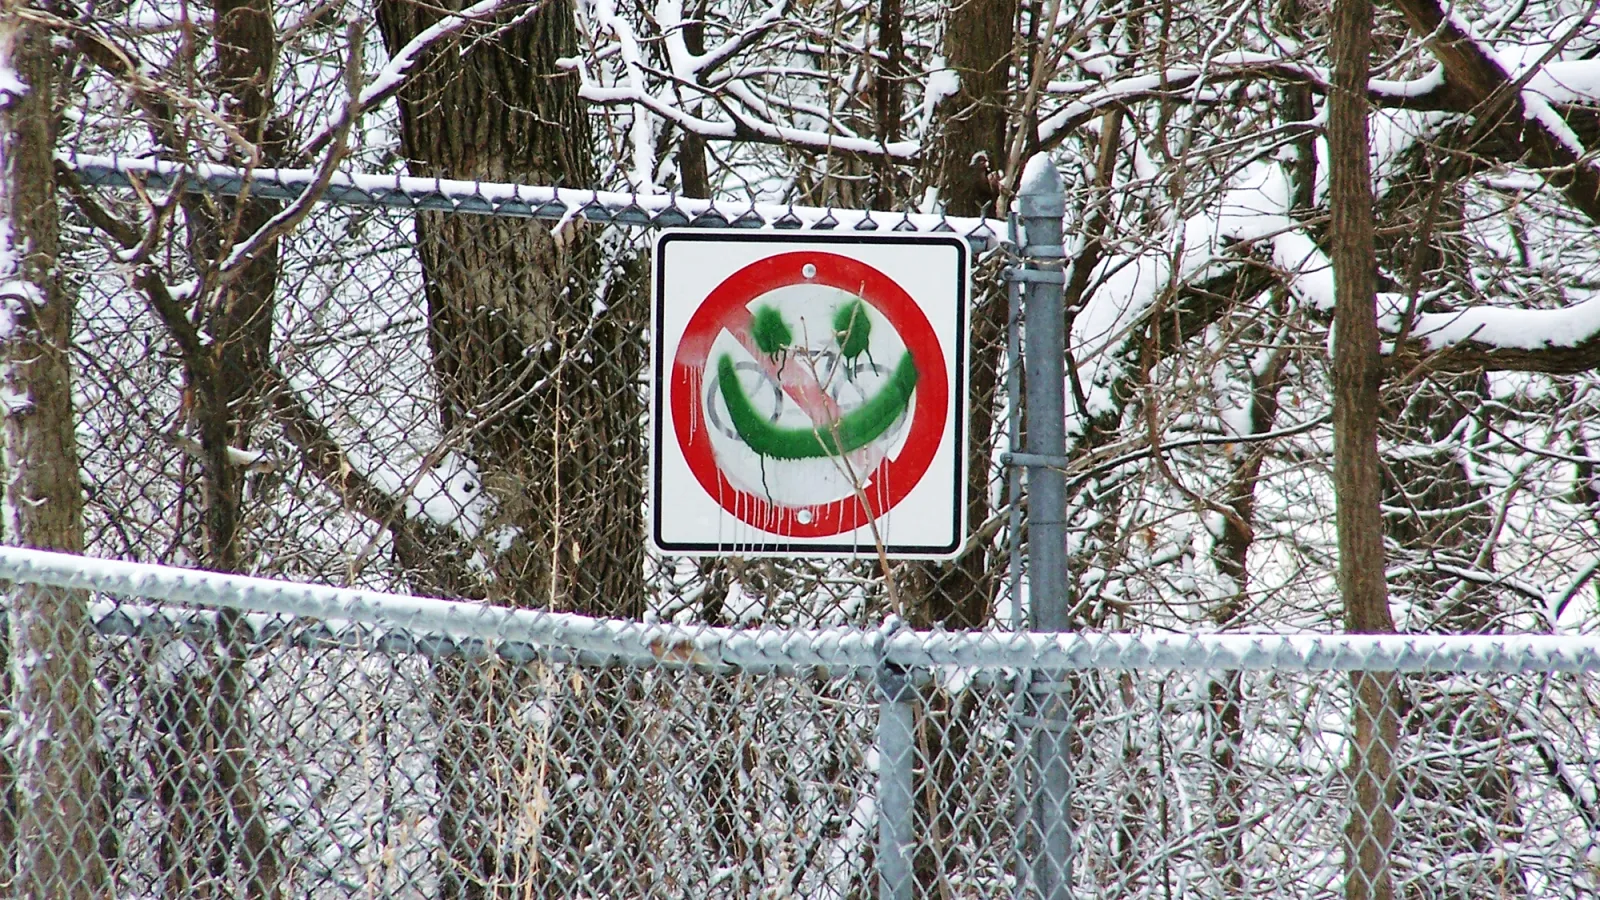 A chain-link fence with a sign, on which smiley face is painted